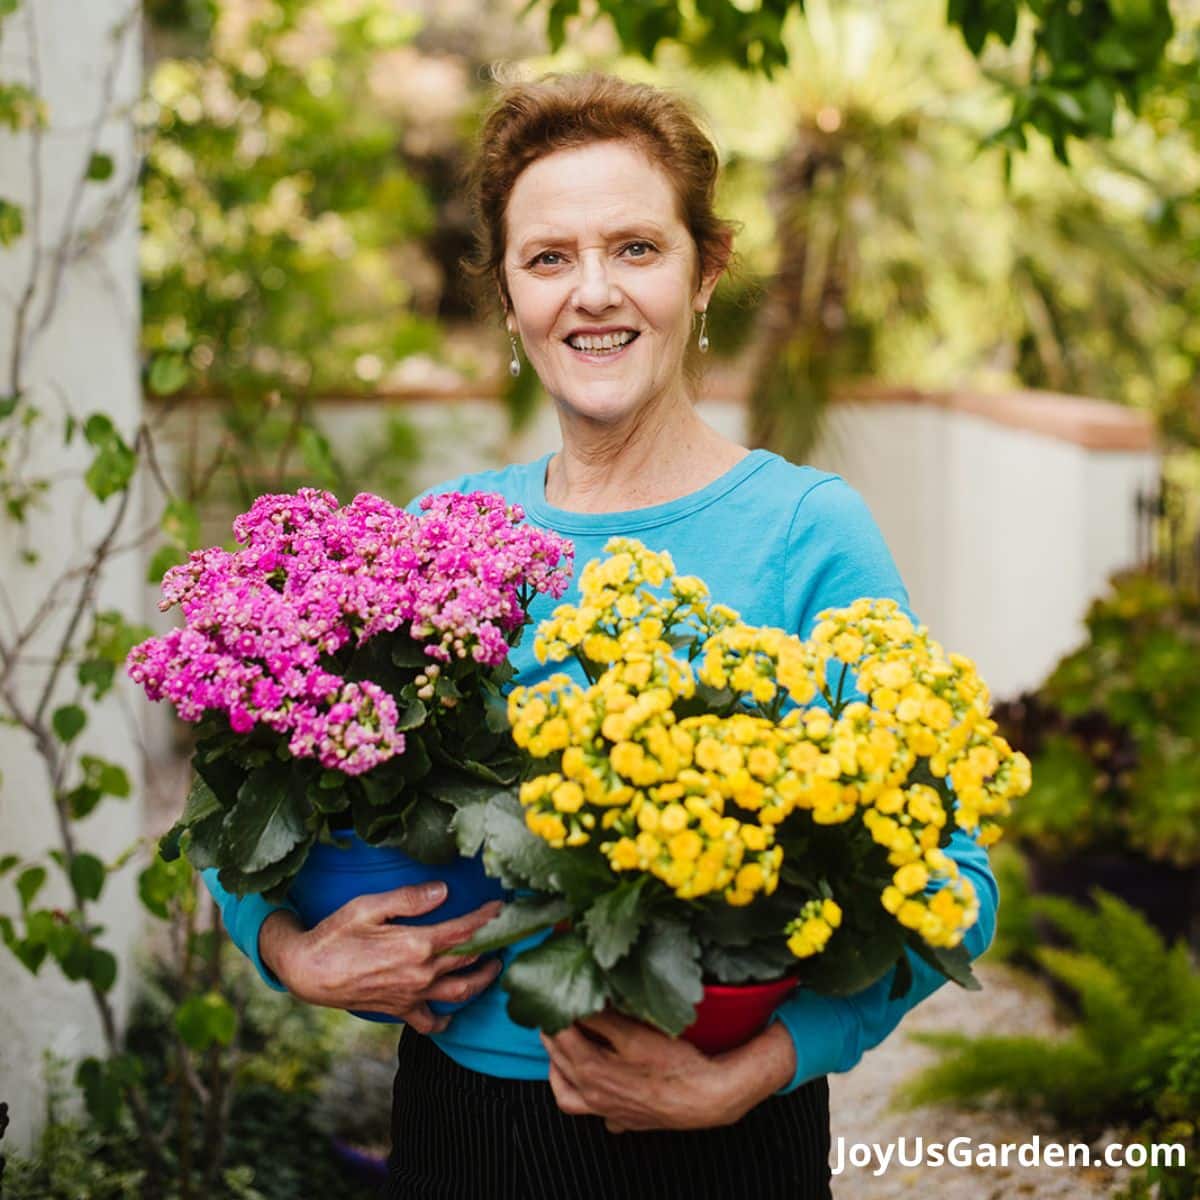 nell foster shown outdoors in turquoise top holding two kalanchoes in pink and yellow 